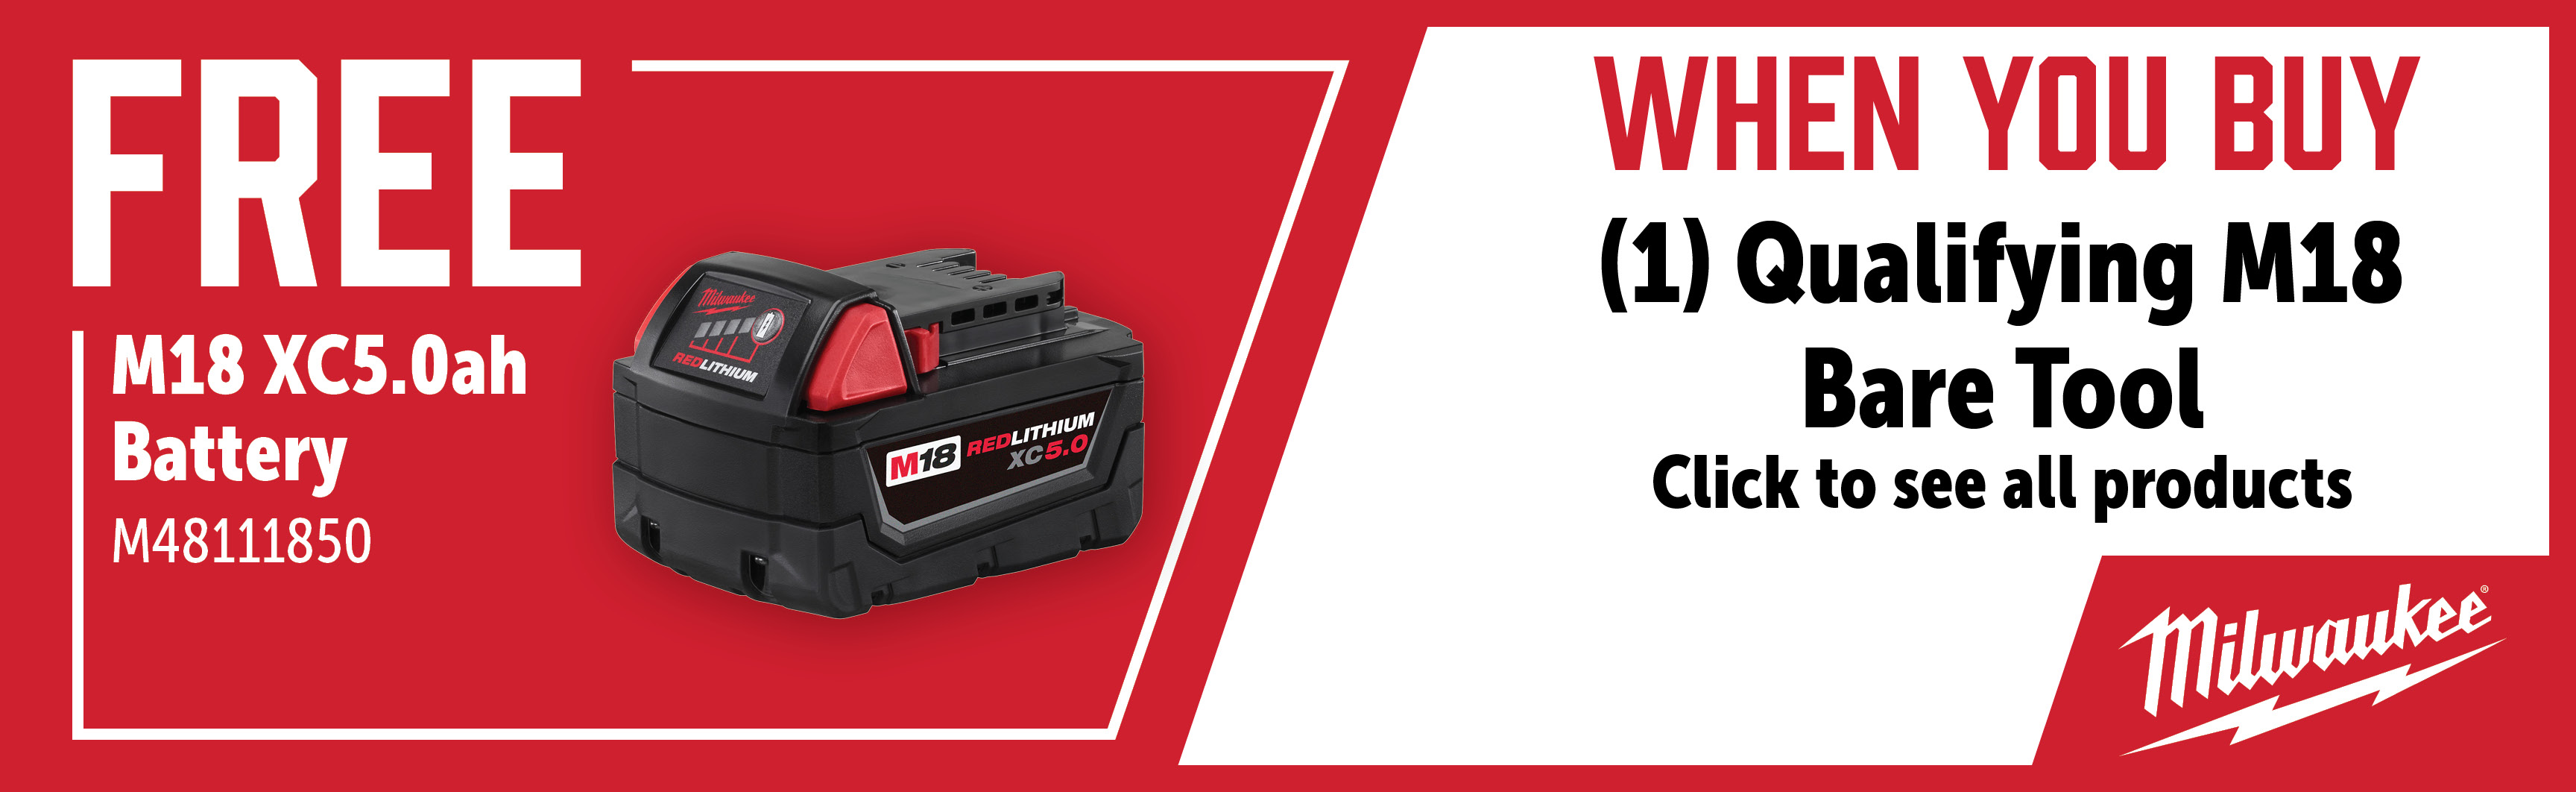 Milwaukee Feb-Apr: Buy a Qualifying M18 Fuel Bare Tool and Get a FREE M48111850